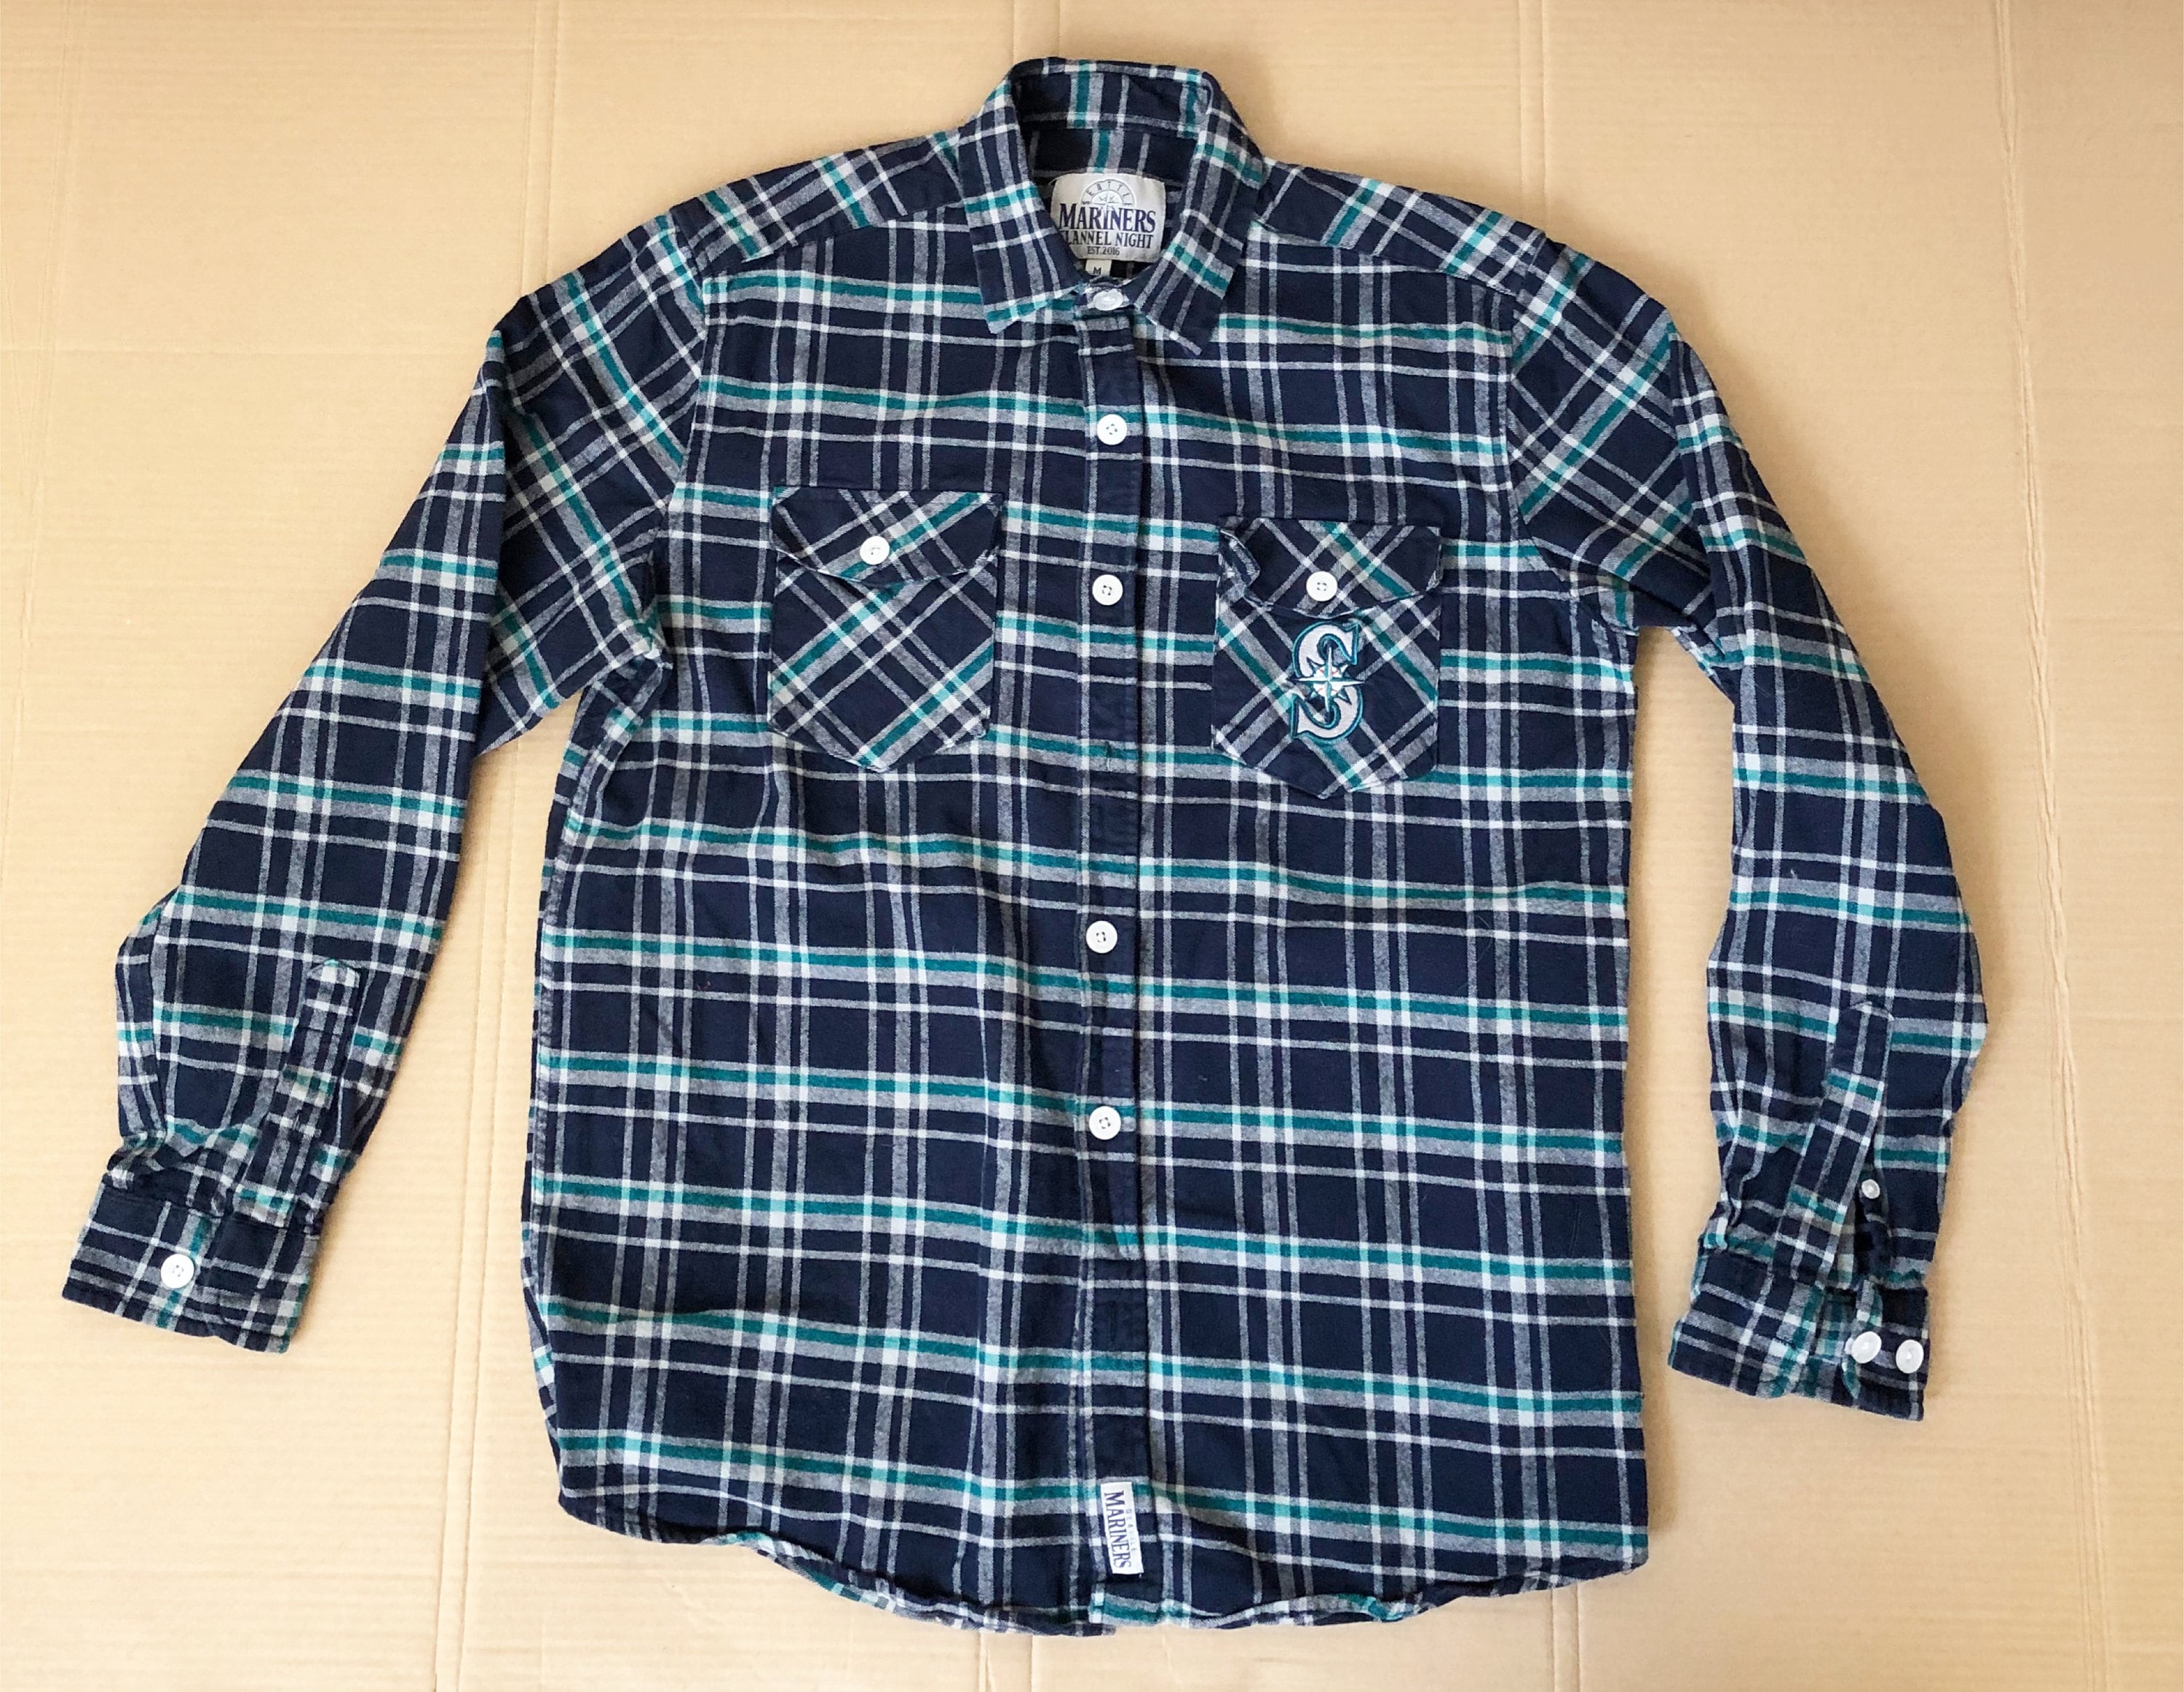 mariners flannel shirt